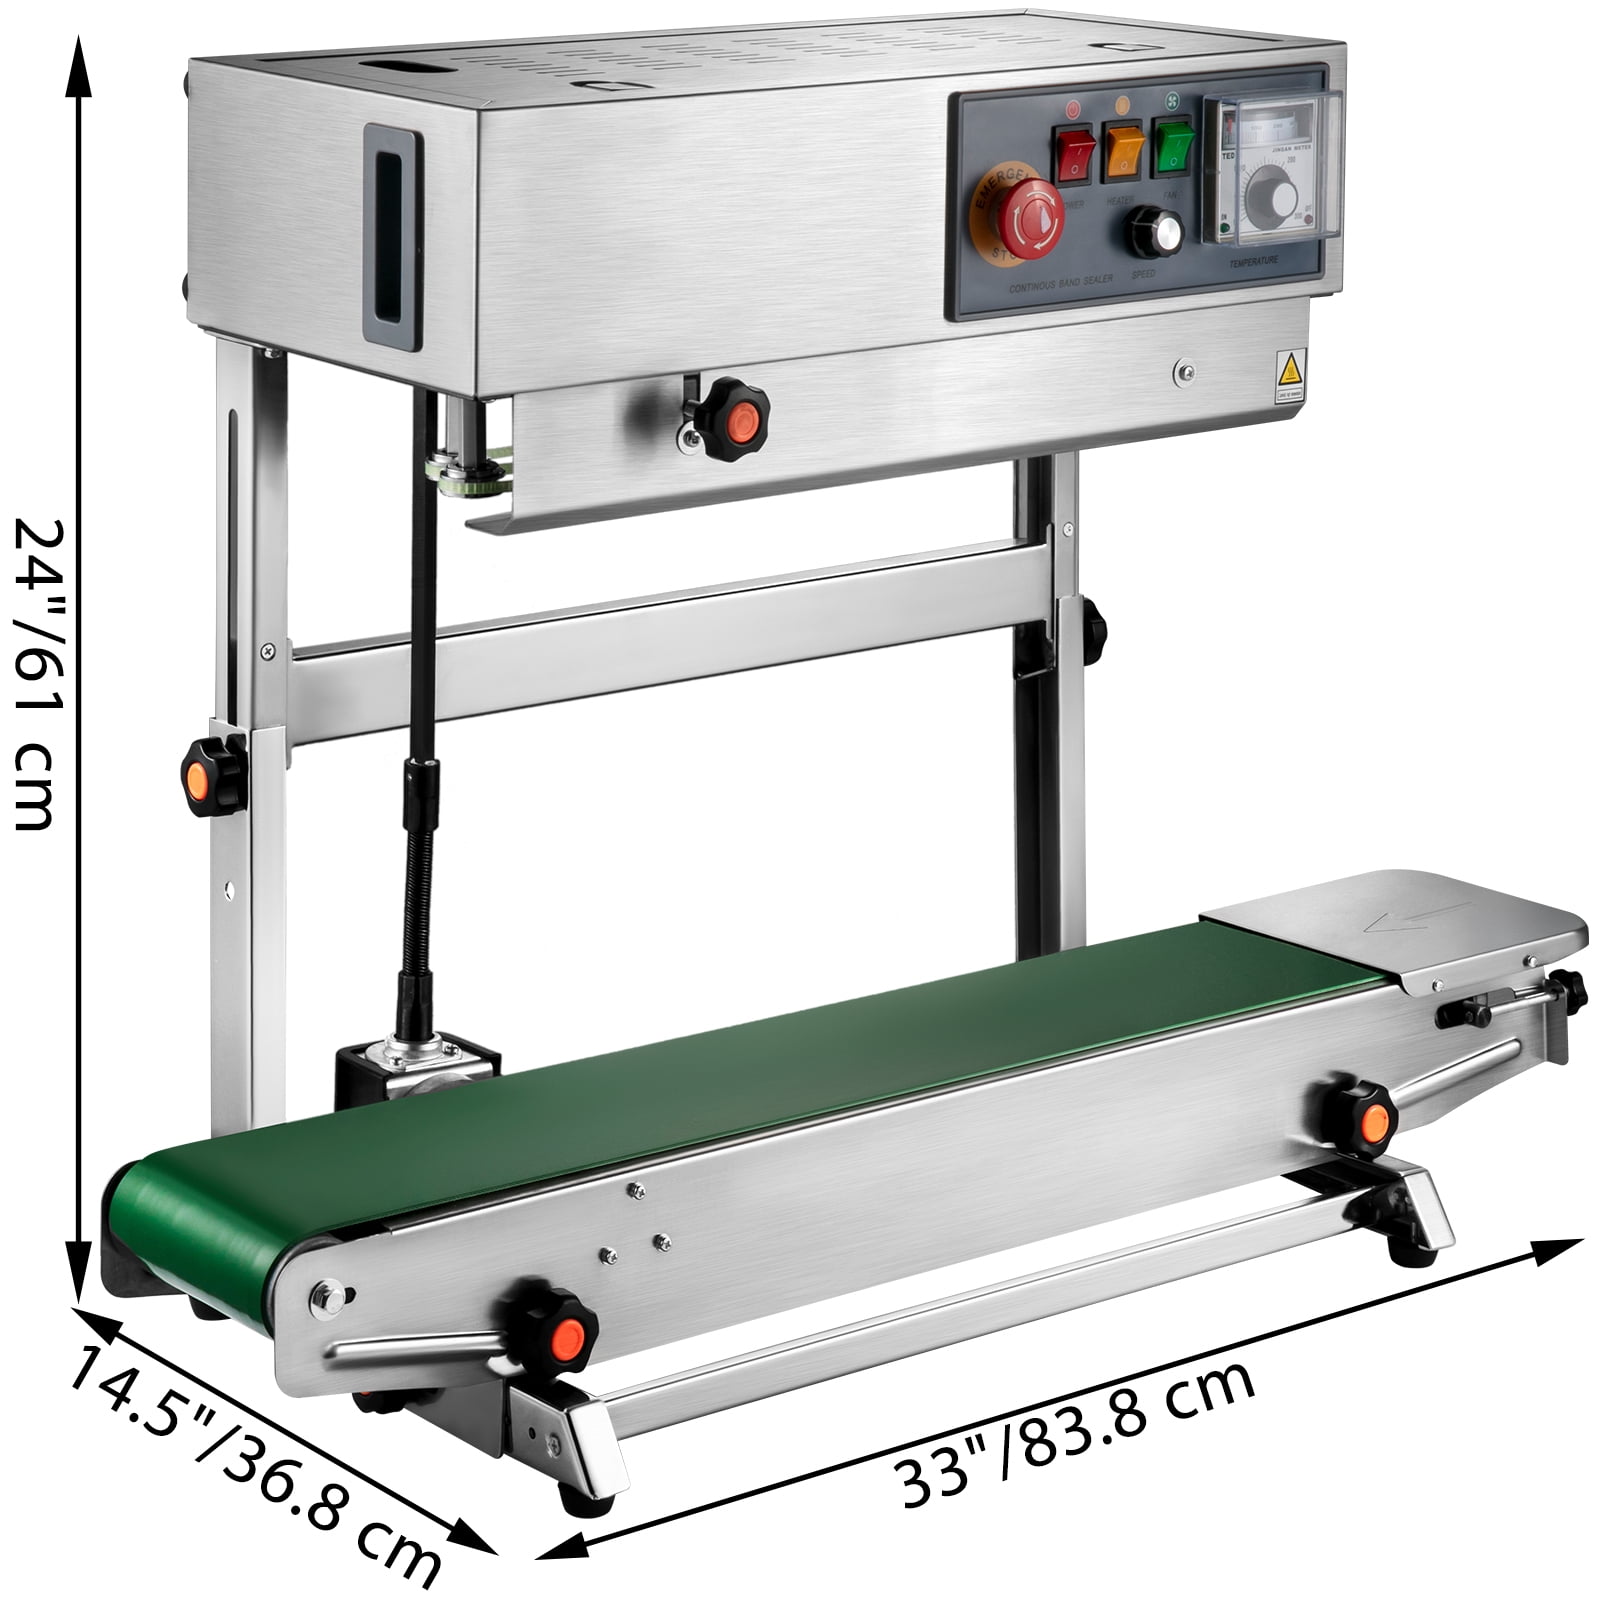 Happybuy FR-770 Continuous Band Sealer 110V Automatic Horizontal Band Sealer with Digital Temperature Control Continuous Sealing Machine 